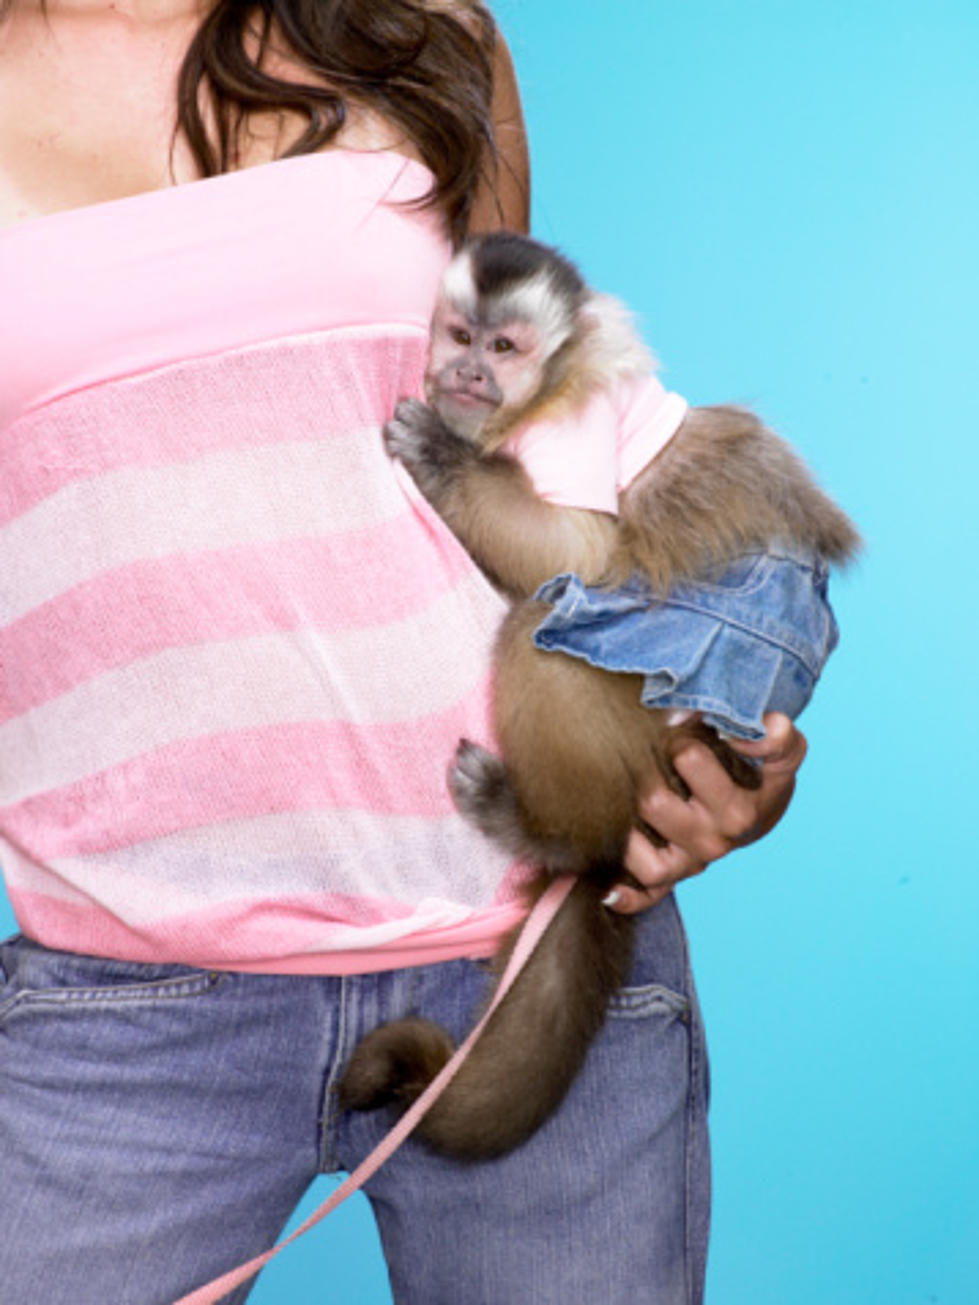 Woman Goes to Virgina Court With Tiny Monkey in Bra